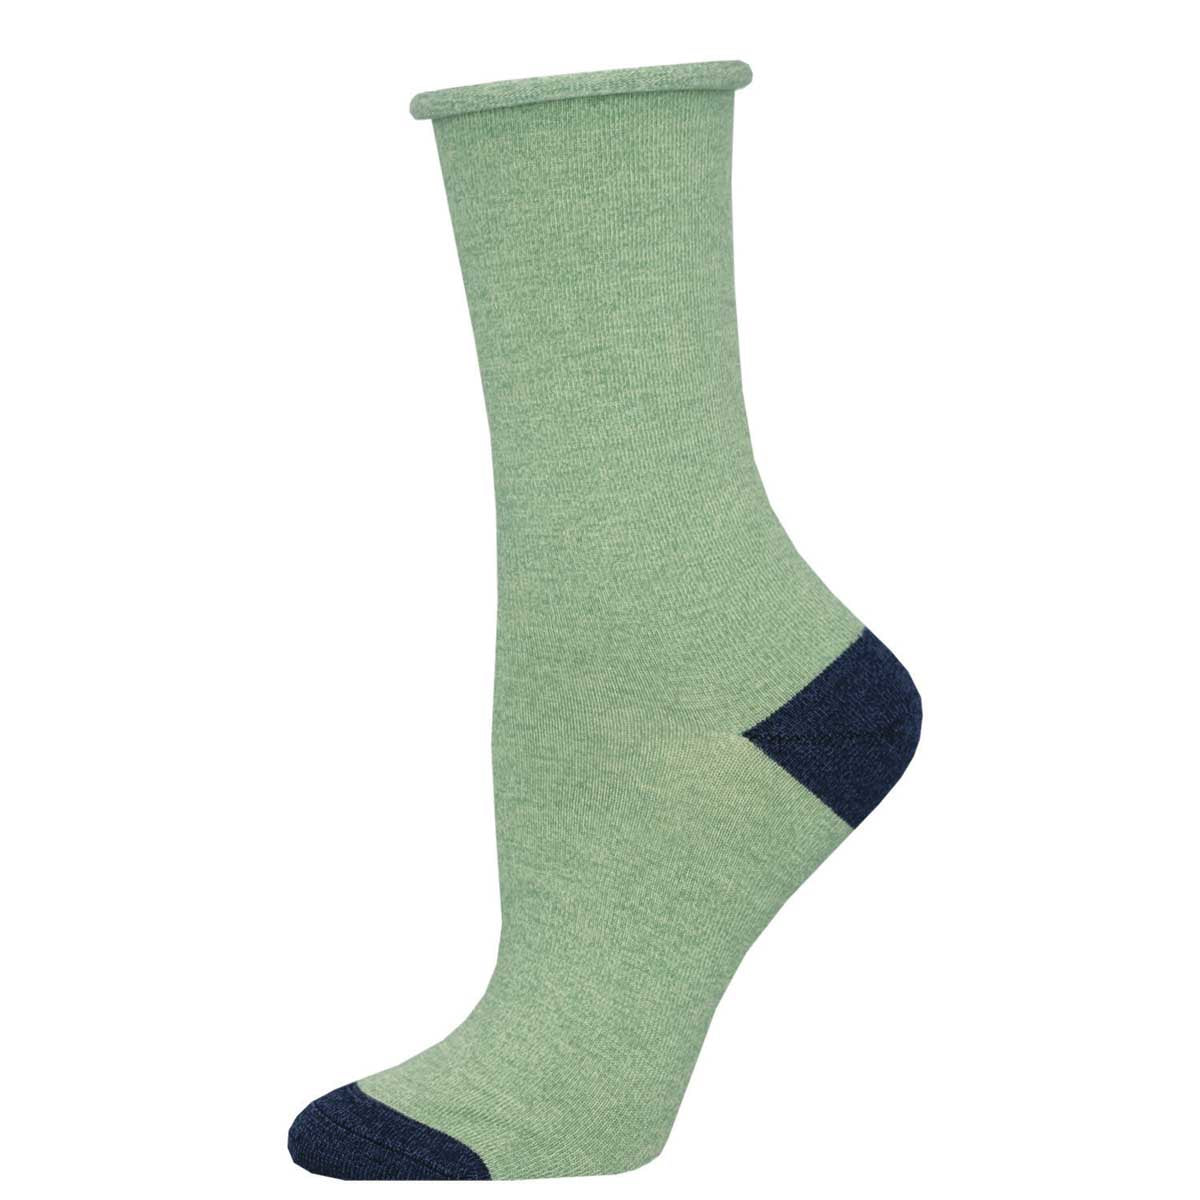 Basic-Colored Socks for Women, Bamboo Collection